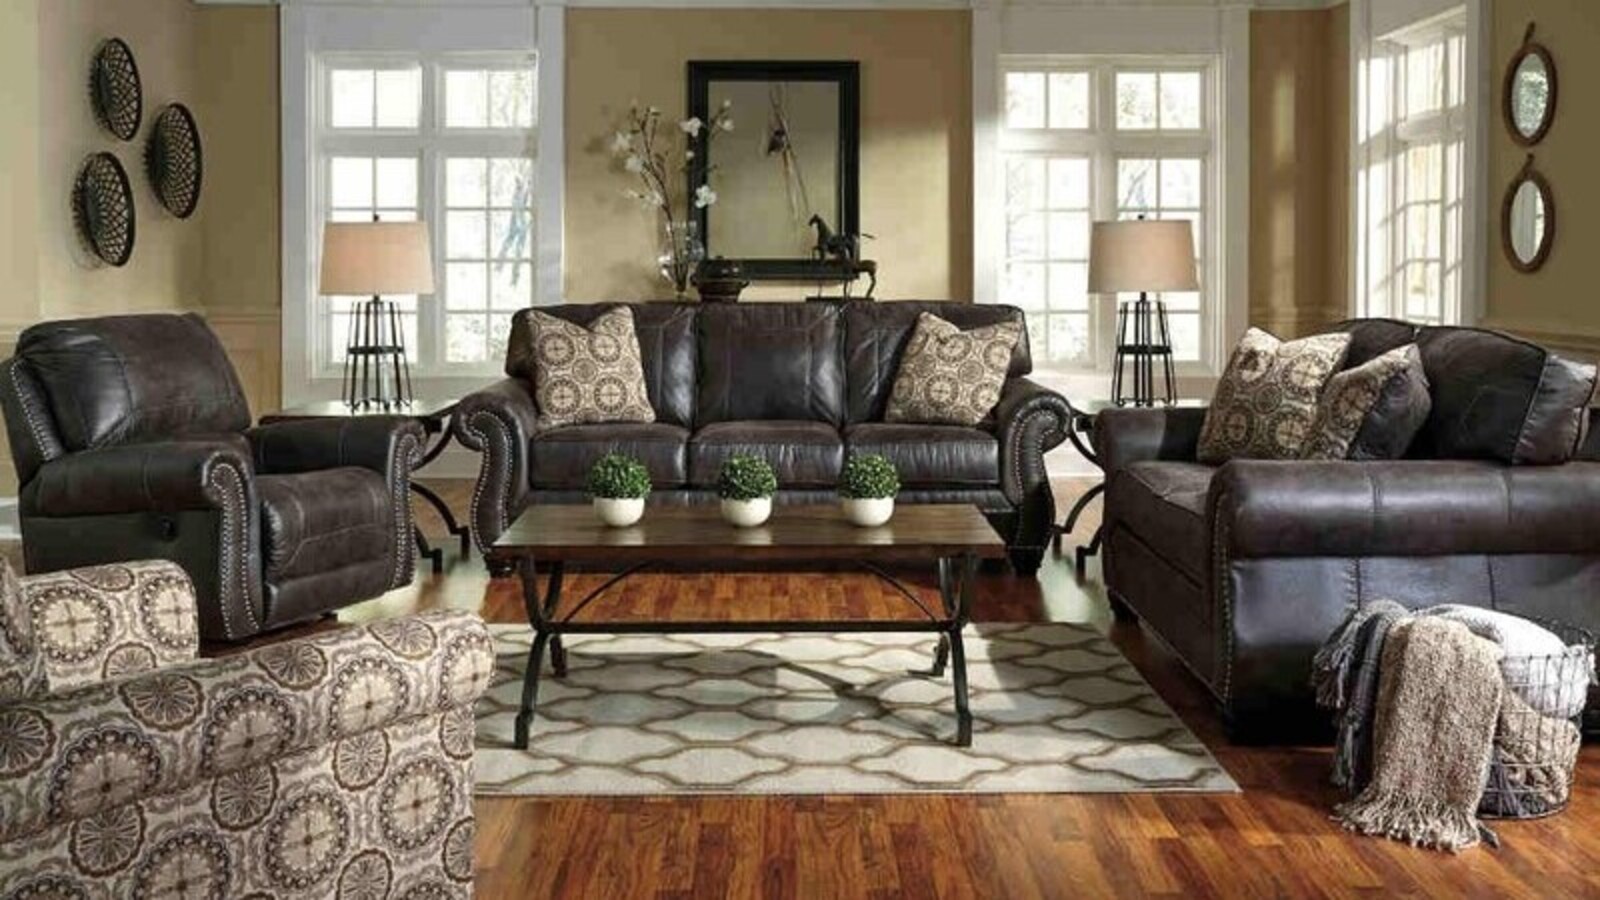 Holiday-Ready with the Ashley Breville Living Room Set - Featured Image 2